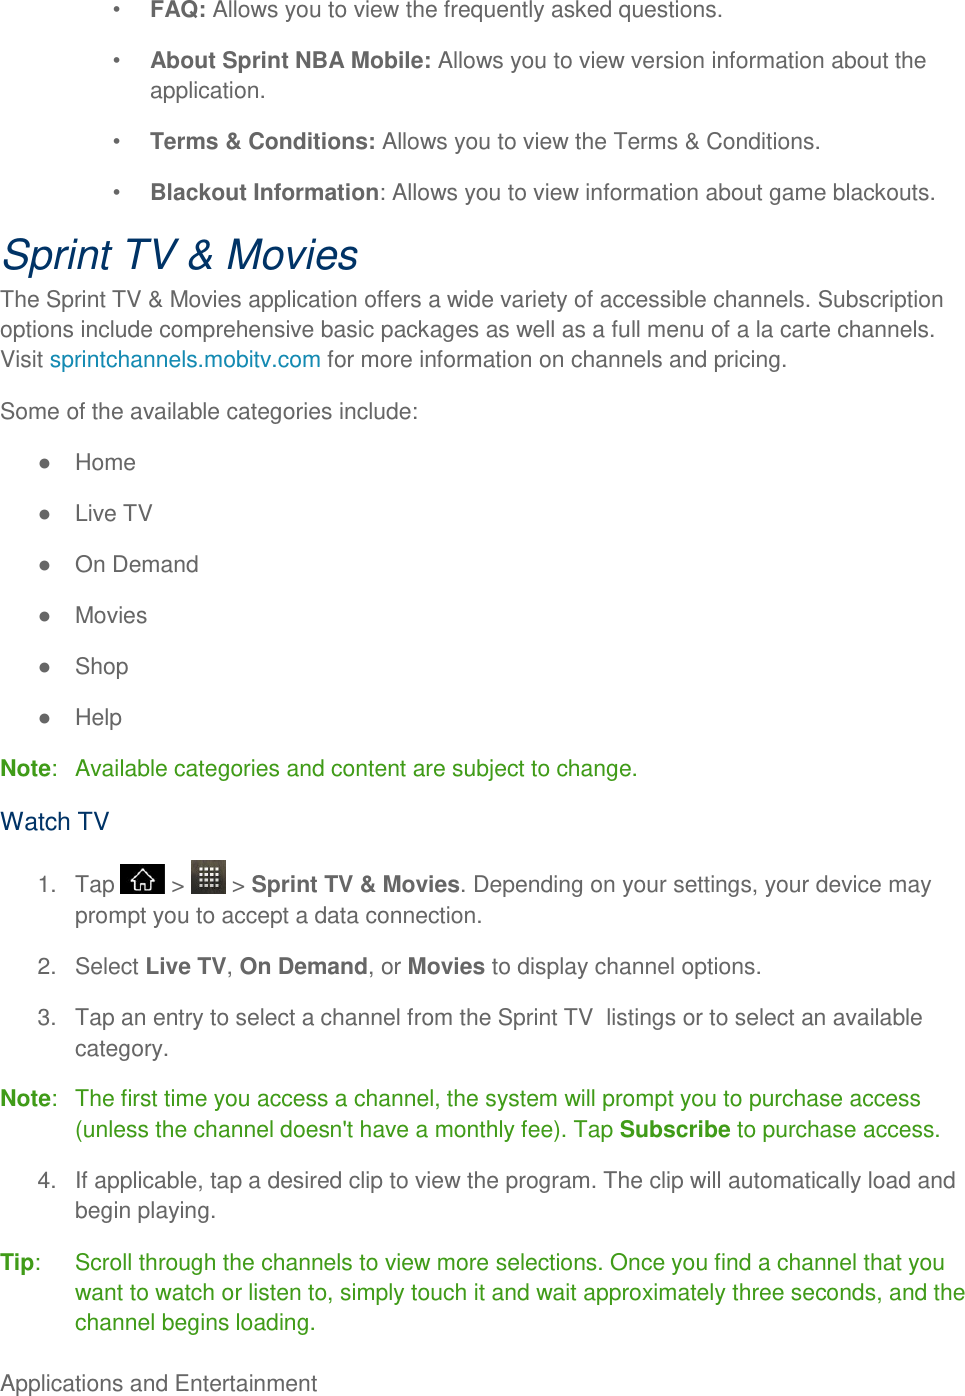 Applications and Entertainment      FAQ: Allows you to view the frequently asked questions.  About Sprint NBA Mobile: Allows you to view version information about the application.  Terms &amp; Conditions: Allows you to view the Terms &amp; Conditions.  Blackout Information: Allows you to view information about game blackouts. Sprint TV &amp; Movies The Sprint TV &amp; Movies application offers a wide variety of accessible channels. Subscription options include comprehensive basic packages as well as a full menu of a la carte channels. Visit sprintchannels.mobitv.com for more information on channels and pricing. Some of the available categories include:   Home   Live TV   On Demand   Movies   Shop   Help Note:   Available categories and content are subject to change. Watch TV 1.  Tap   &gt;   &gt; Sprint TV &amp; Movies. Depending on your settings, your device may prompt you to accept a data connection. 2.  Select Live TV, On Demand, or Movies to display channel options. 3.  Tap an entry to select a channel from the Sprint TV  listings or to select an available category. Note:   The first time you access a channel, the system will prompt you to purchase access (unless the channel doesn&apos;t have a monthly fee). Tap Subscribe to purchase access. 4.  If applicable, tap a desired clip to view the program. The clip will automatically load and begin playing. Tip:   Scroll through the channels to view more selections. Once you find a channel that you want to watch or listen to, simply touch it and wait approximately three seconds, and the channel begins loading. 